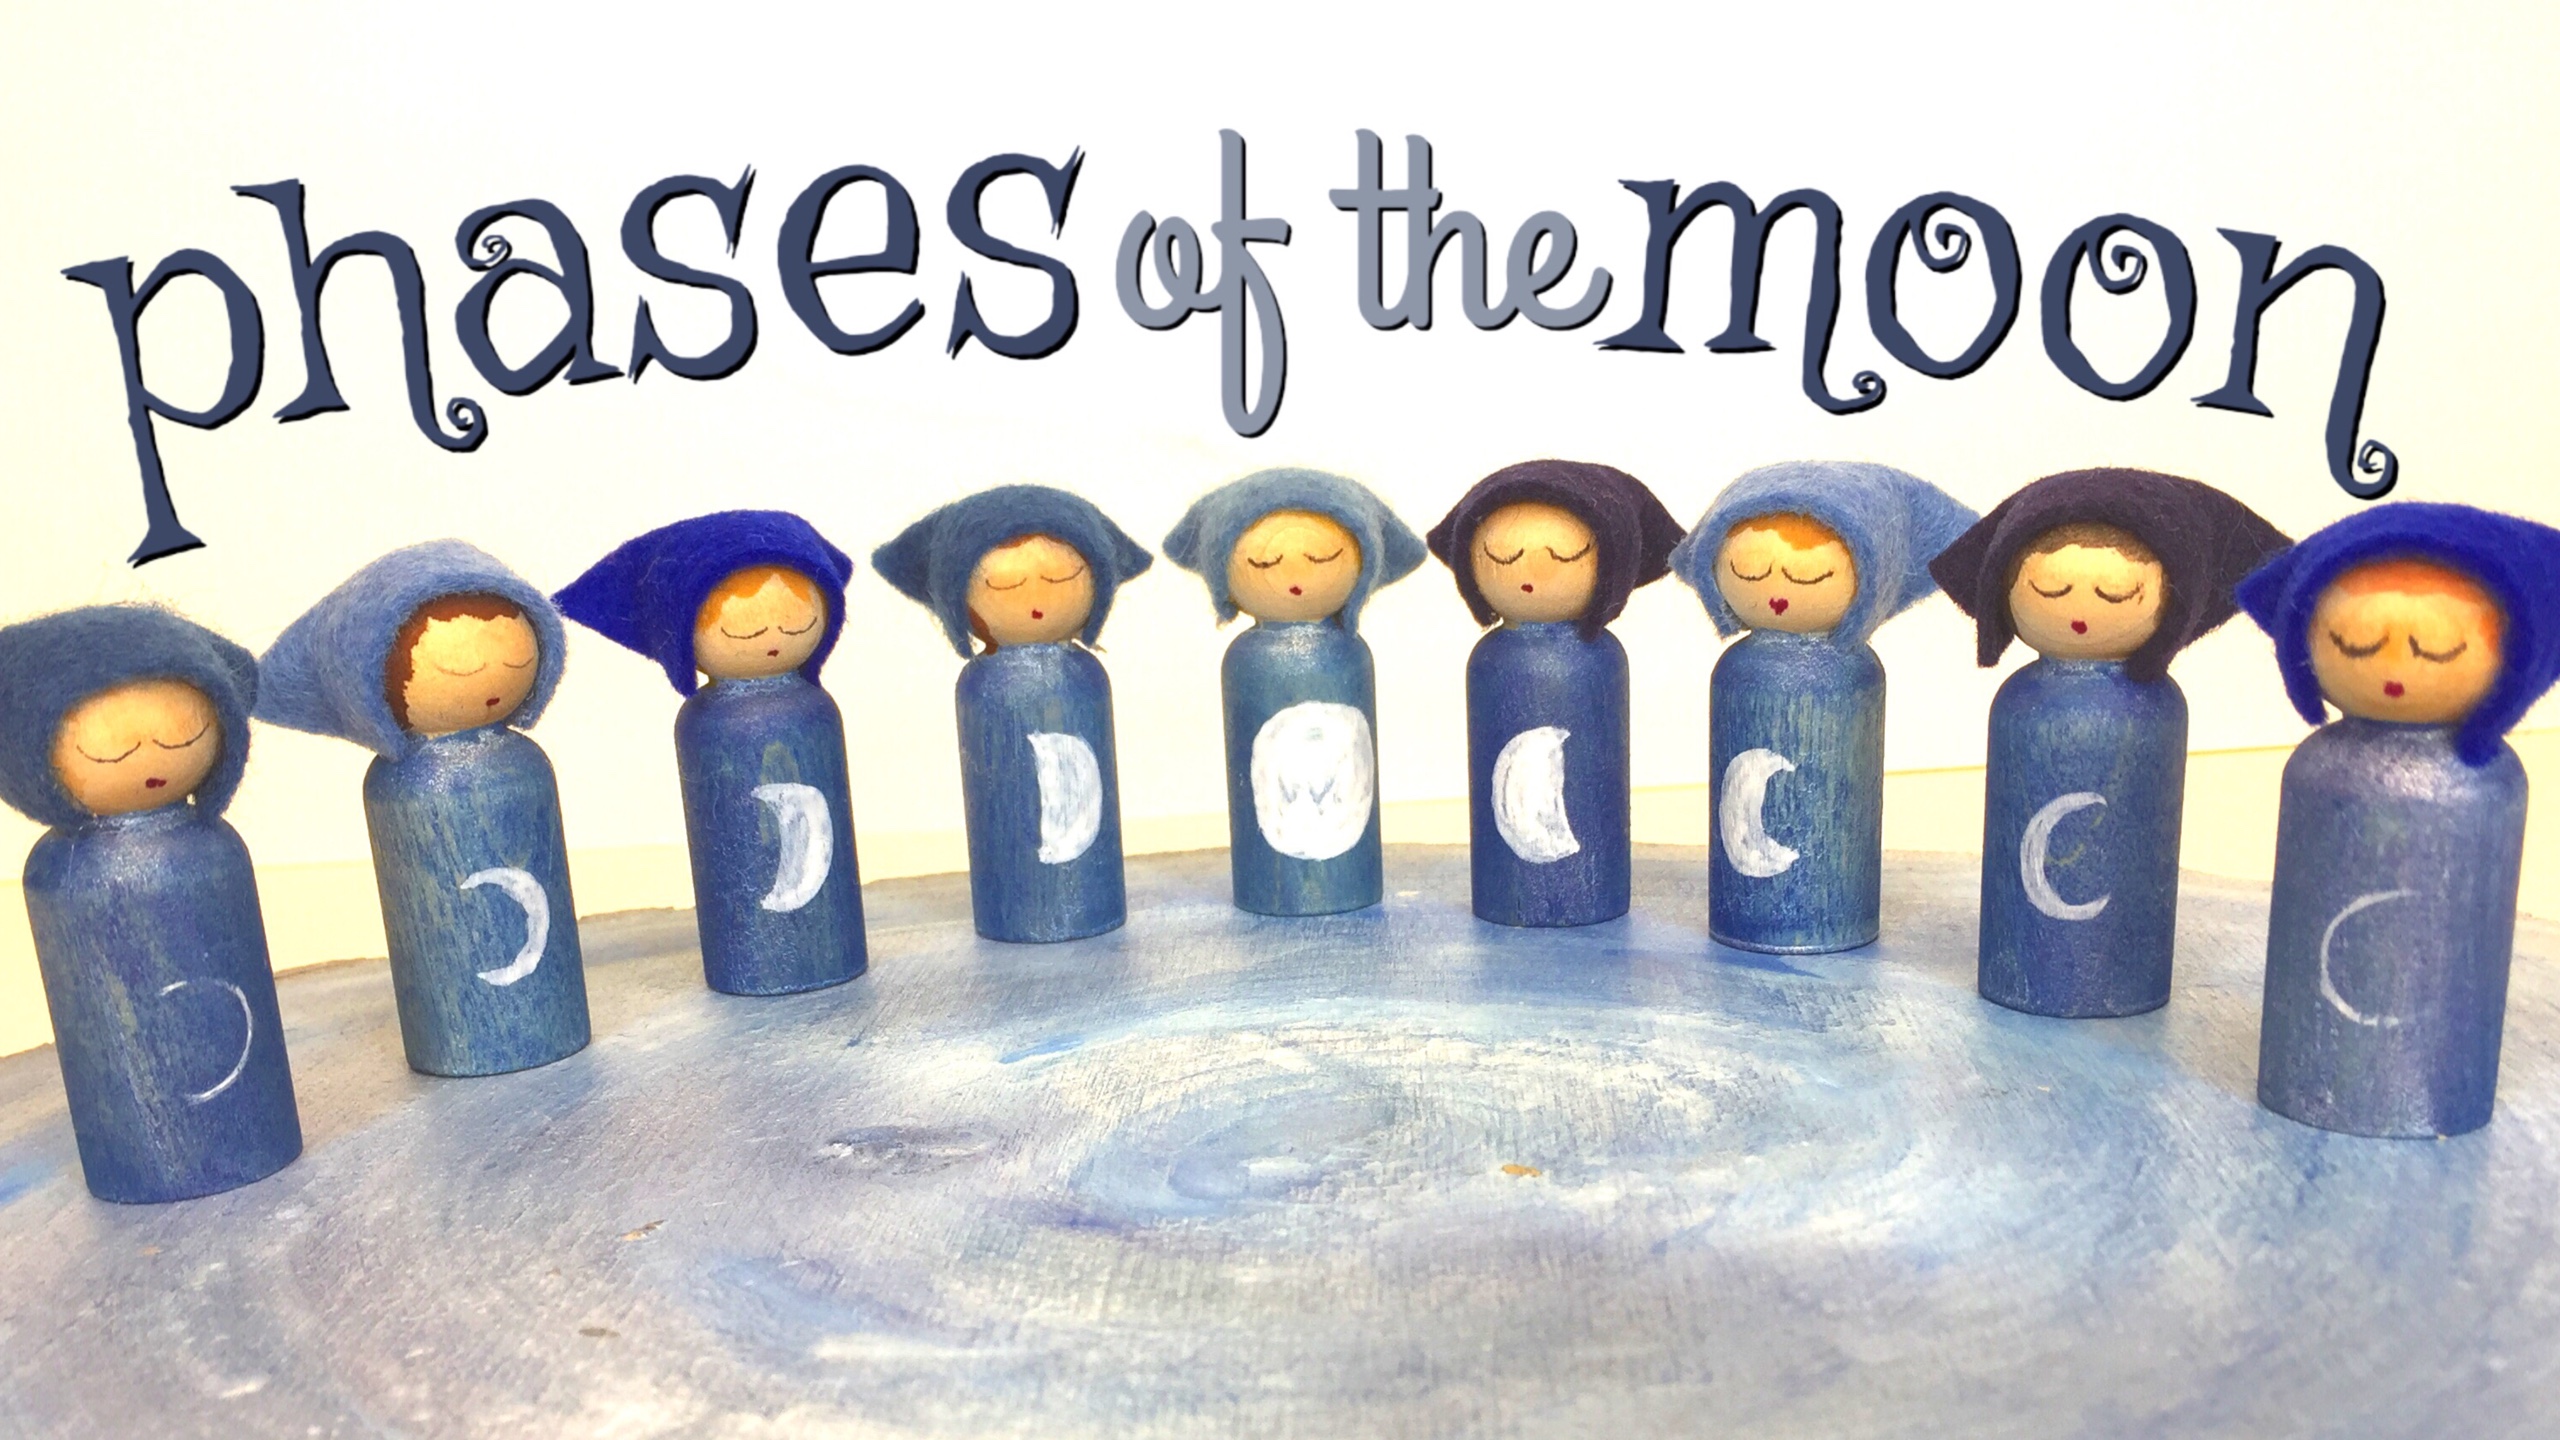 PHASES OF THE MOON PEG DOLL TUTORIAL